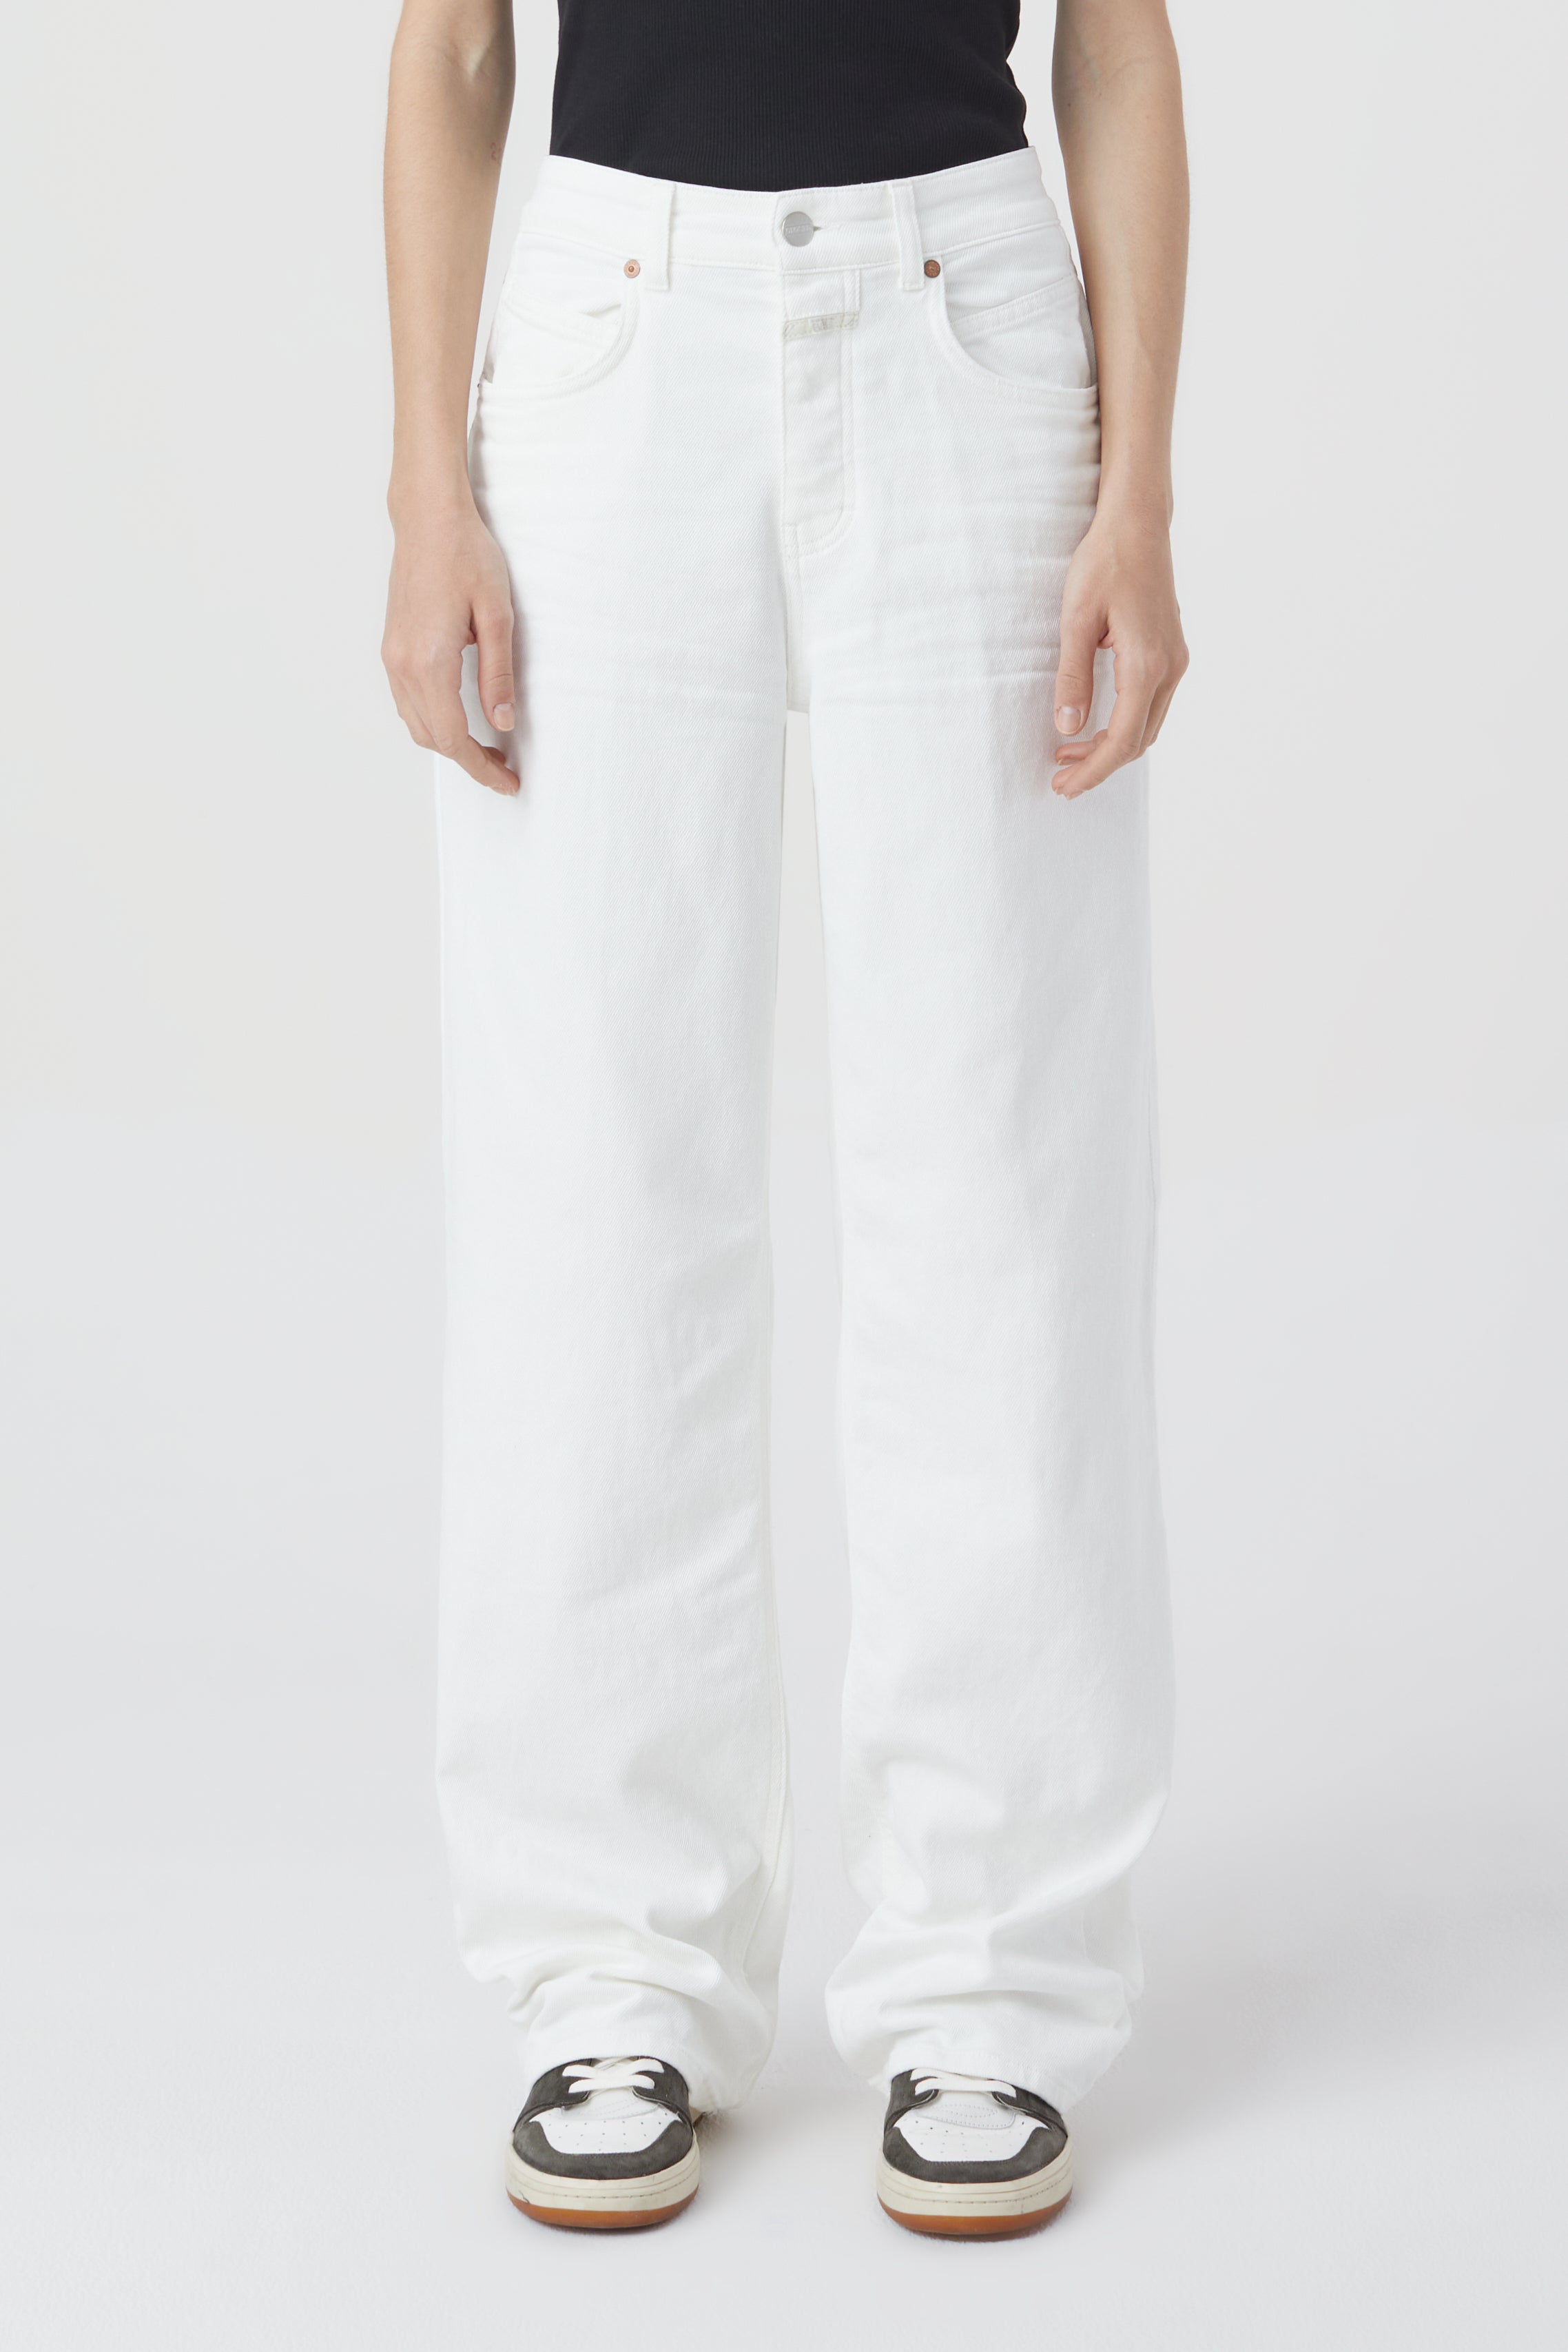 CLOSED-OUTLET-SALE-STYLE-NAME-NIKKA-JEANS-Hosen-ARCHIVE-COLLECTION.jpg